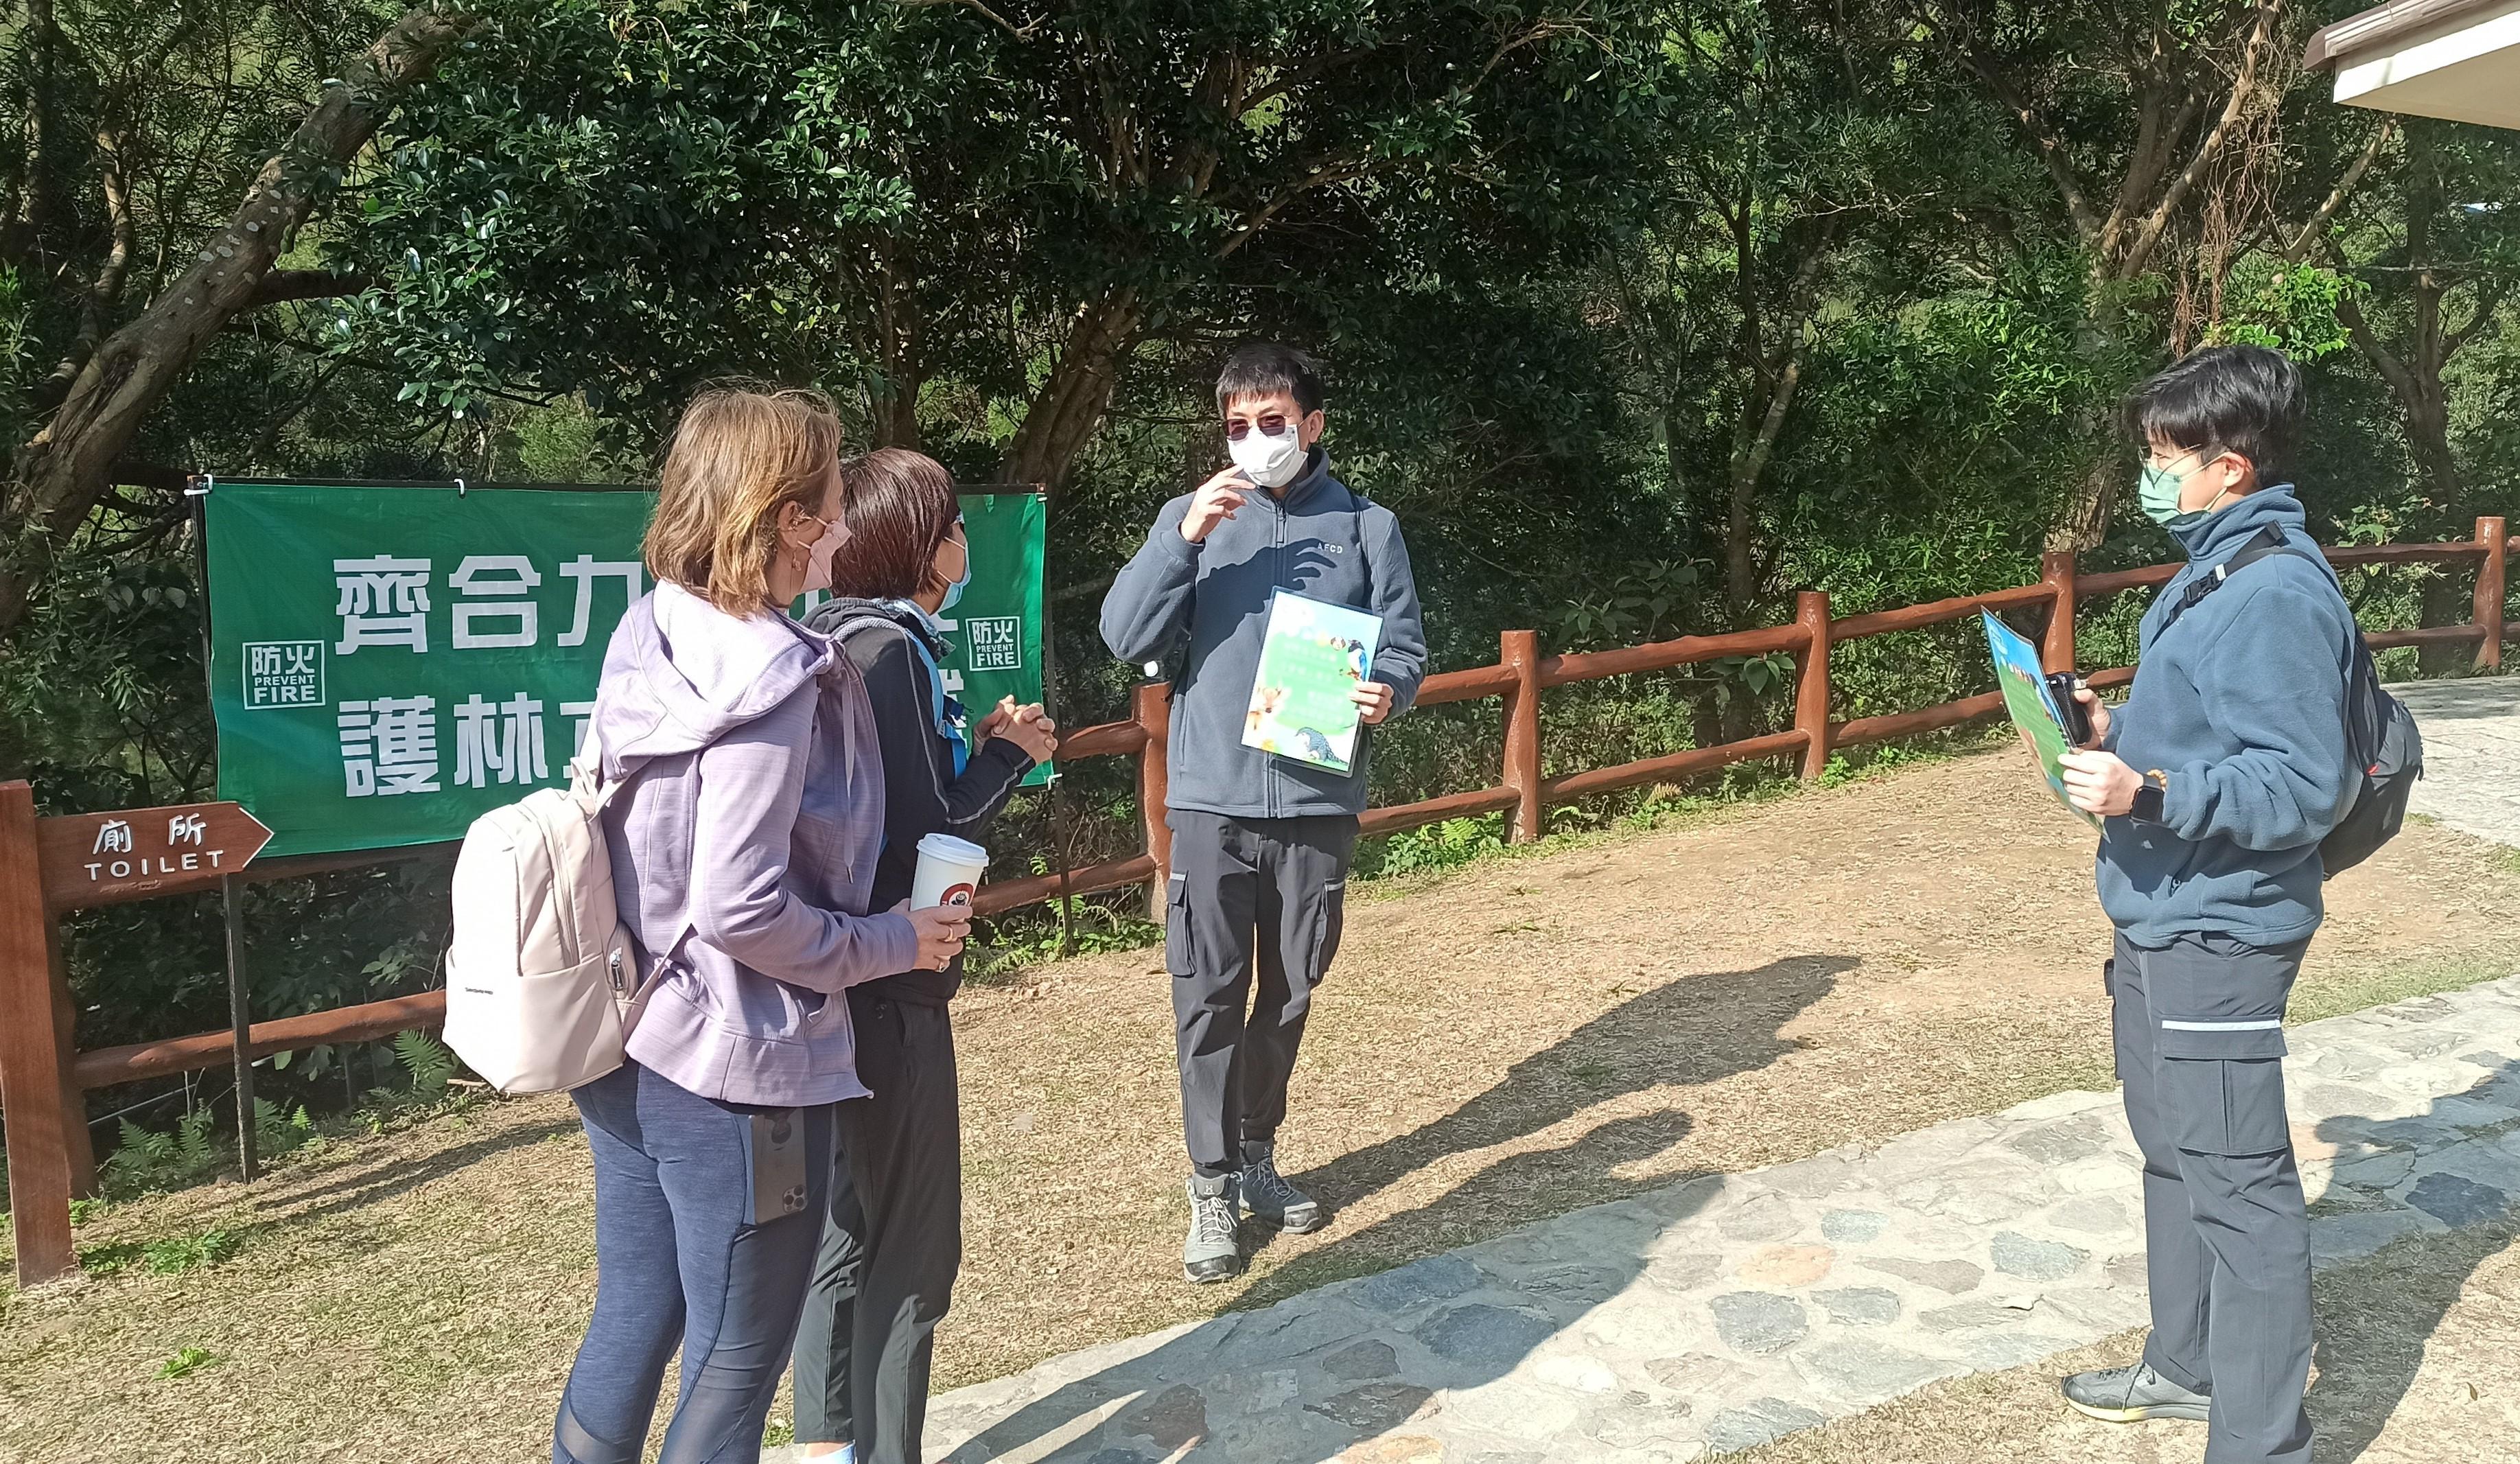 The Agriculture, Fisheries and Conservation Department (AFCD) today (February 28) reminded members of the public to wear a mask and maintain appropriate social distancing in country parks. AFCD officers have strengthened publicity in country parks since last weekend to remind visitors to wear a mask.